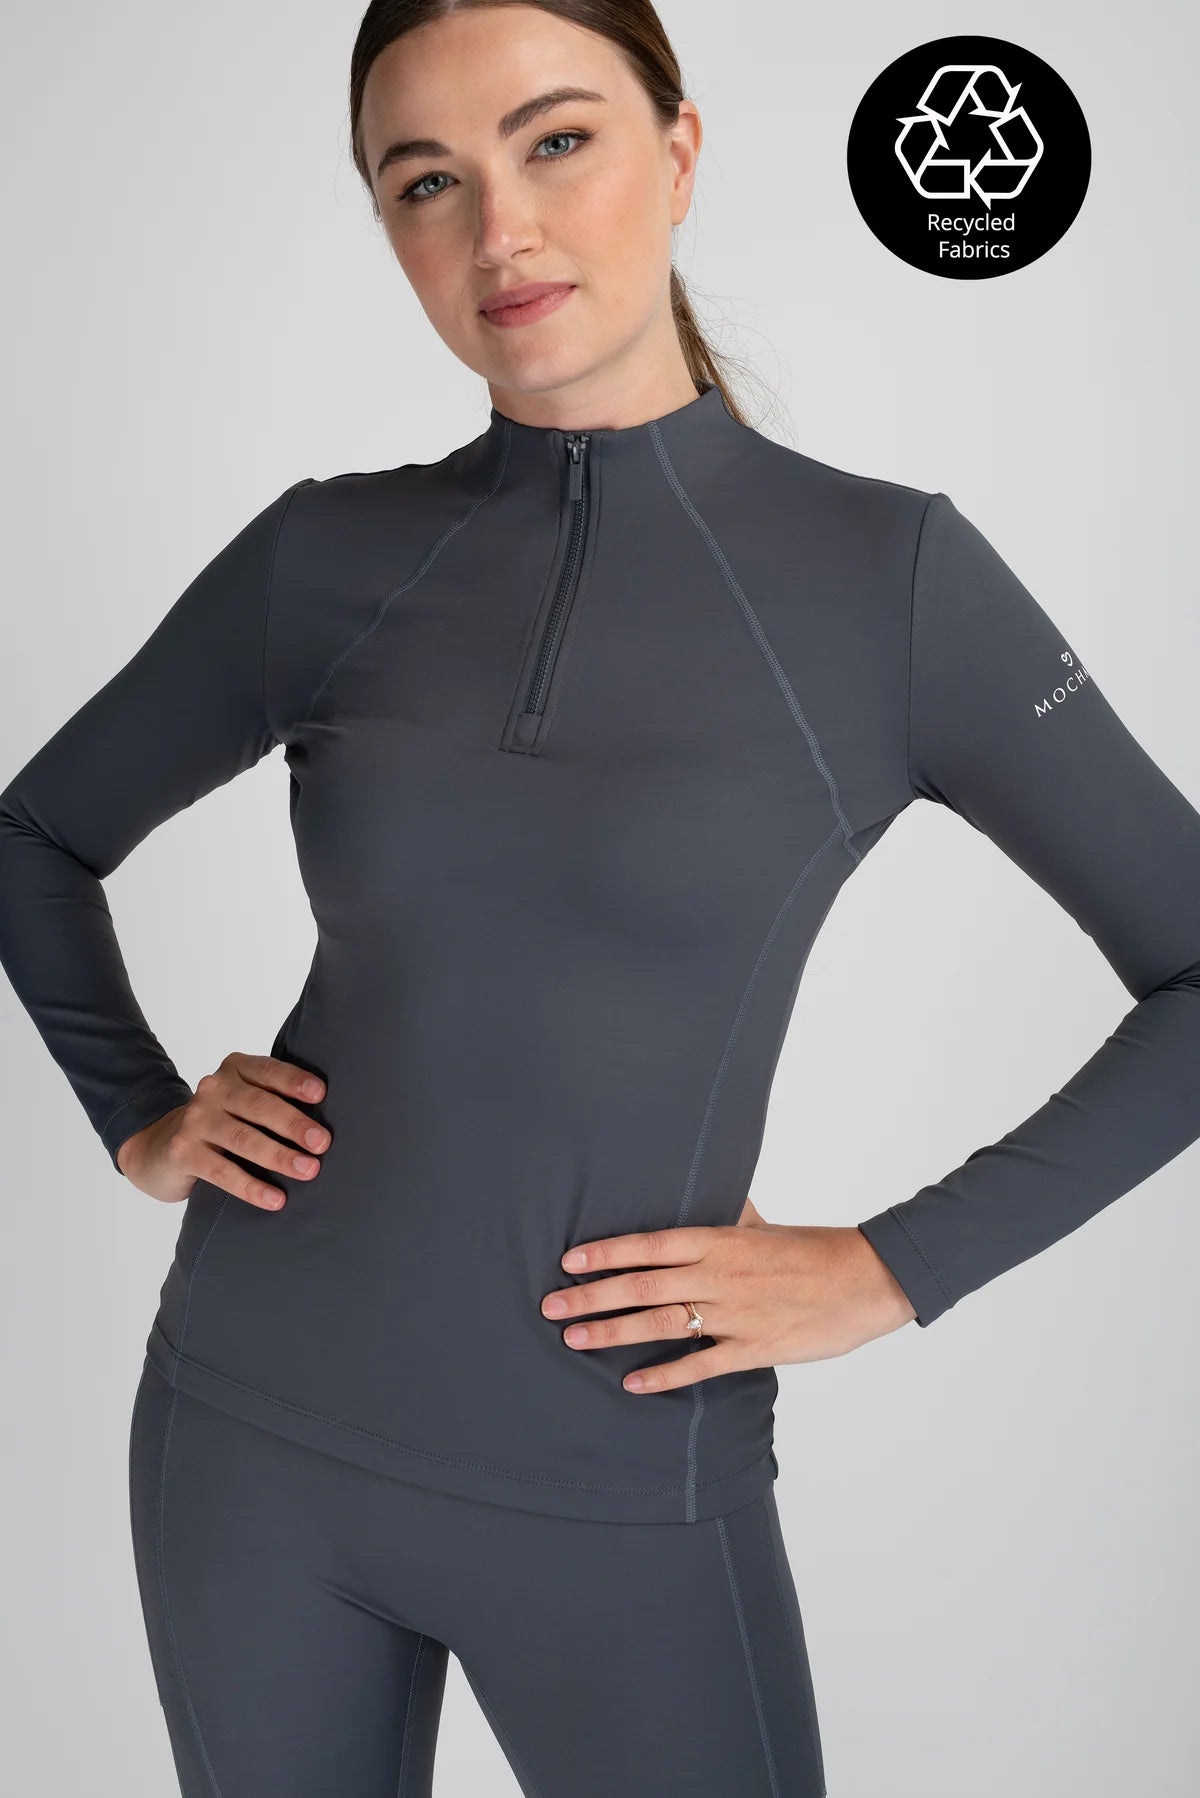 Mochara Baselayer in Charcoal Recycled Fabric